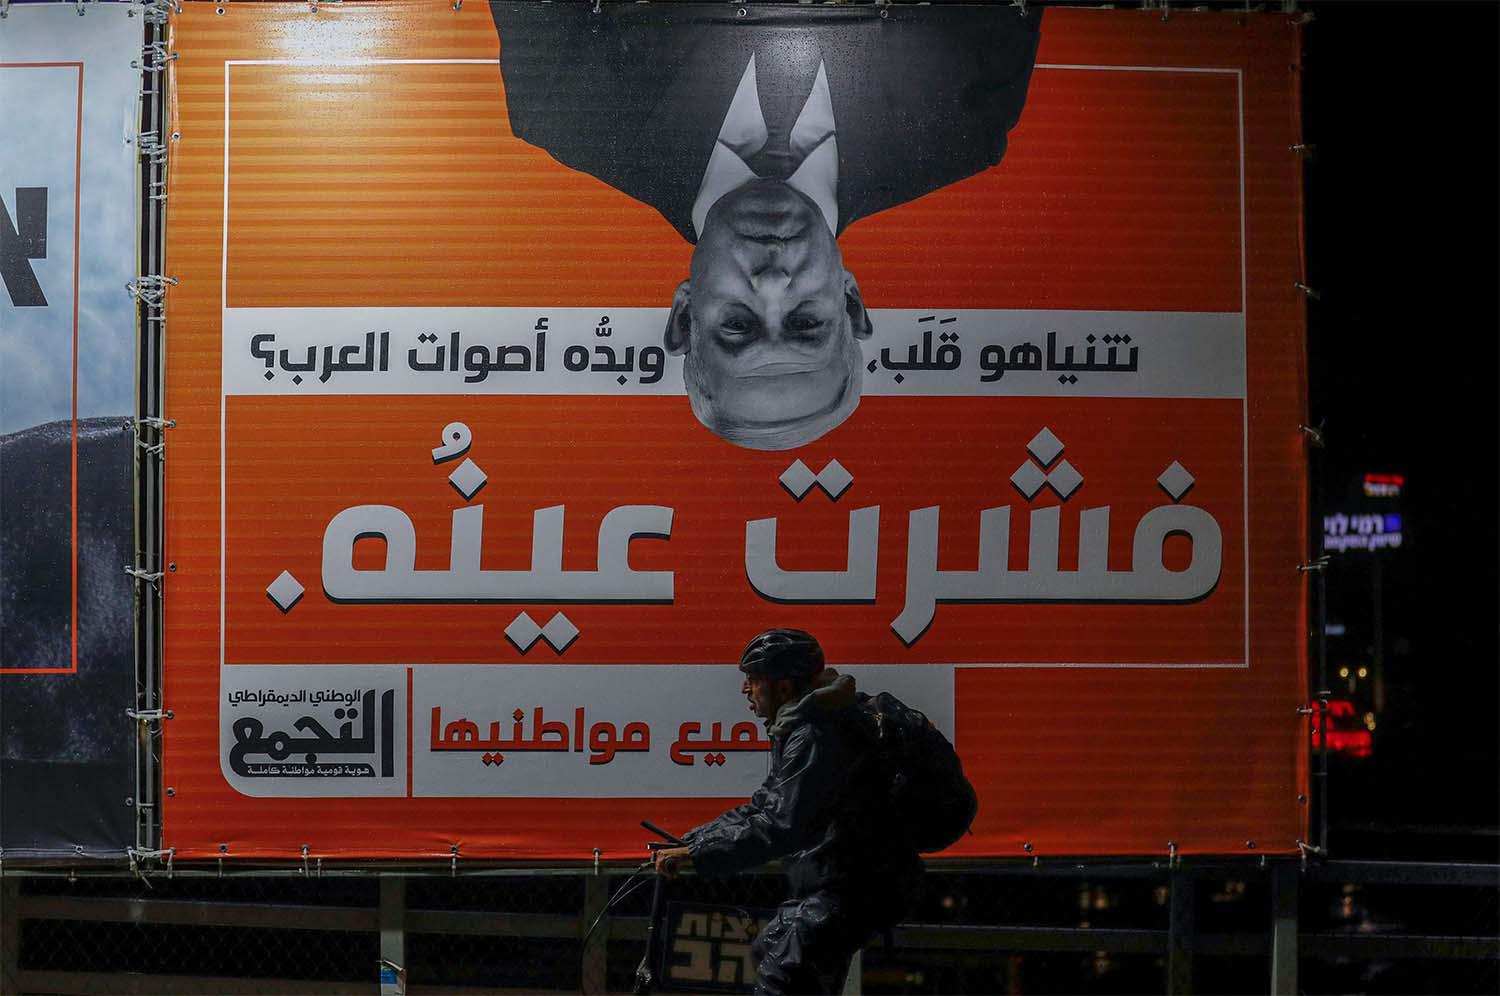 A campaign billboard for the Balad Party, part of the joint Arab list, which reads in Arabic "Now Netanyahu turned around, wanting Arab votes? He wishes!" 